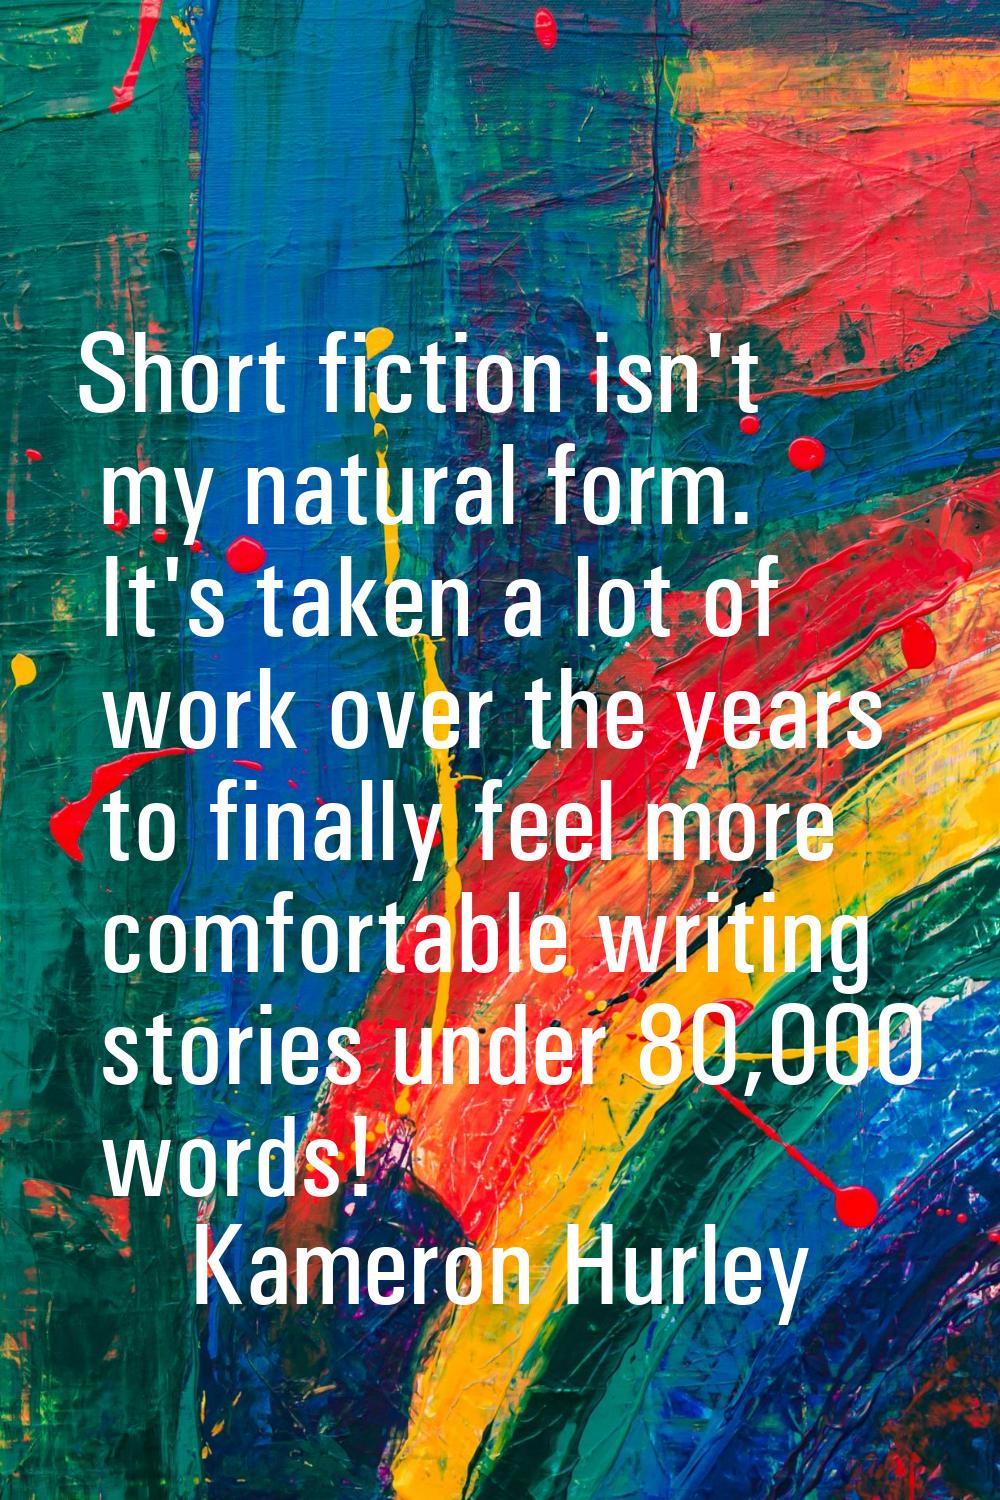 Short fiction isn't my natural form. It's taken a lot of work over the years to finally feel more c